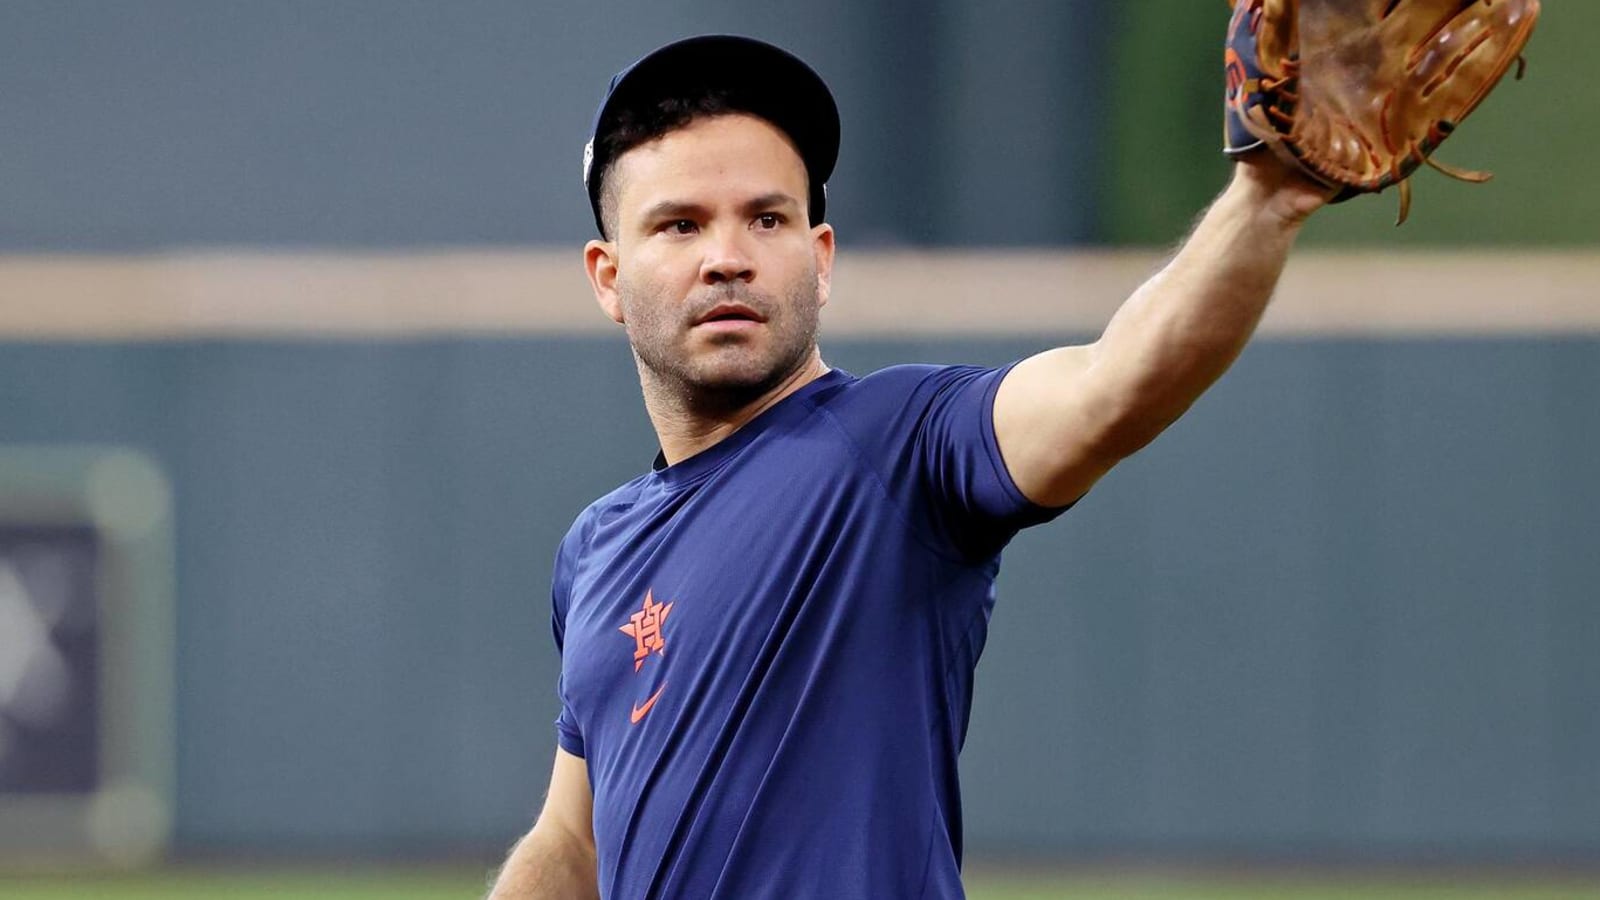 Kings troll Jose Altuve with trash can during 'look-a-like' game